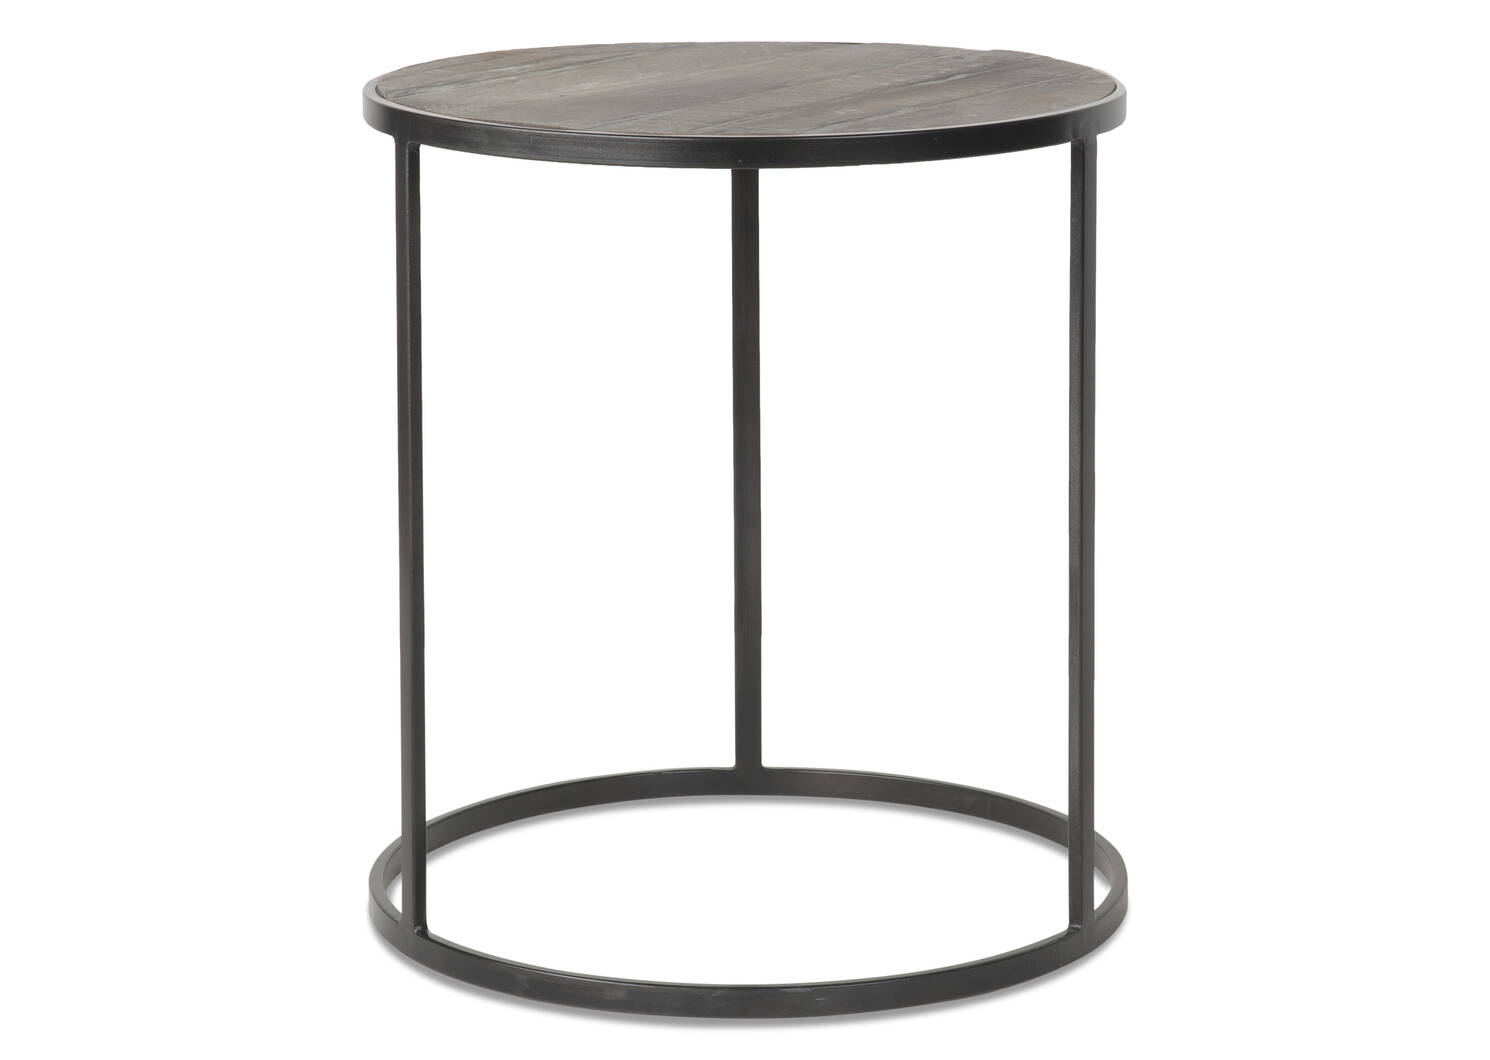 Table d'appoint Madera